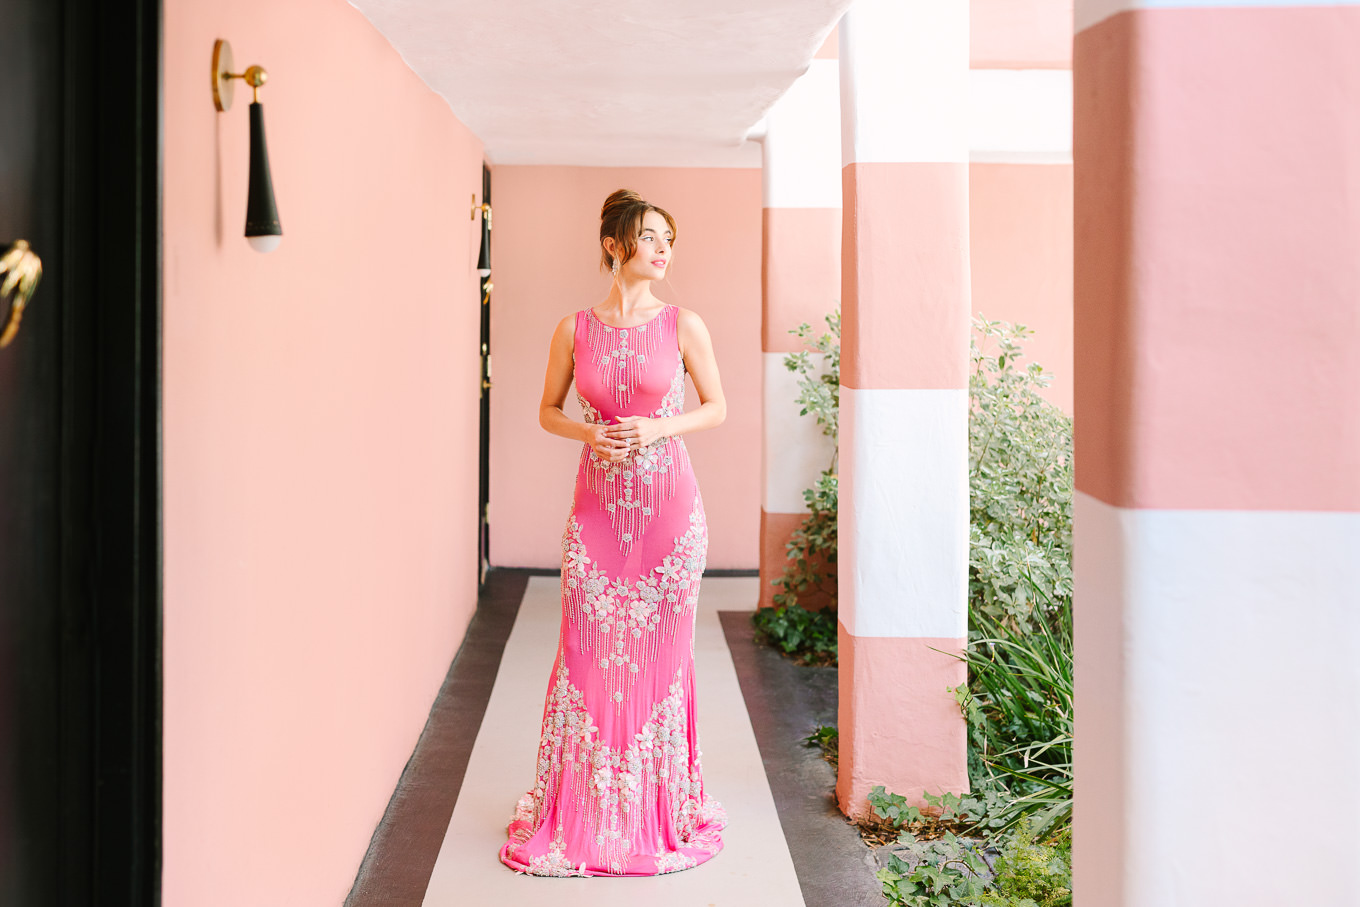 Naeem Khan pink gown in pink Sands Hotel hallway | Kindred Presets x Mary Costa Photography Sands Hotel Ad Campaign | Colorful Palm Springs wedding photography | #palmspringsphotographer #lightroompresets #sandshotel #pinkhotel   Source: Mary Costa Photography | Los Angeles